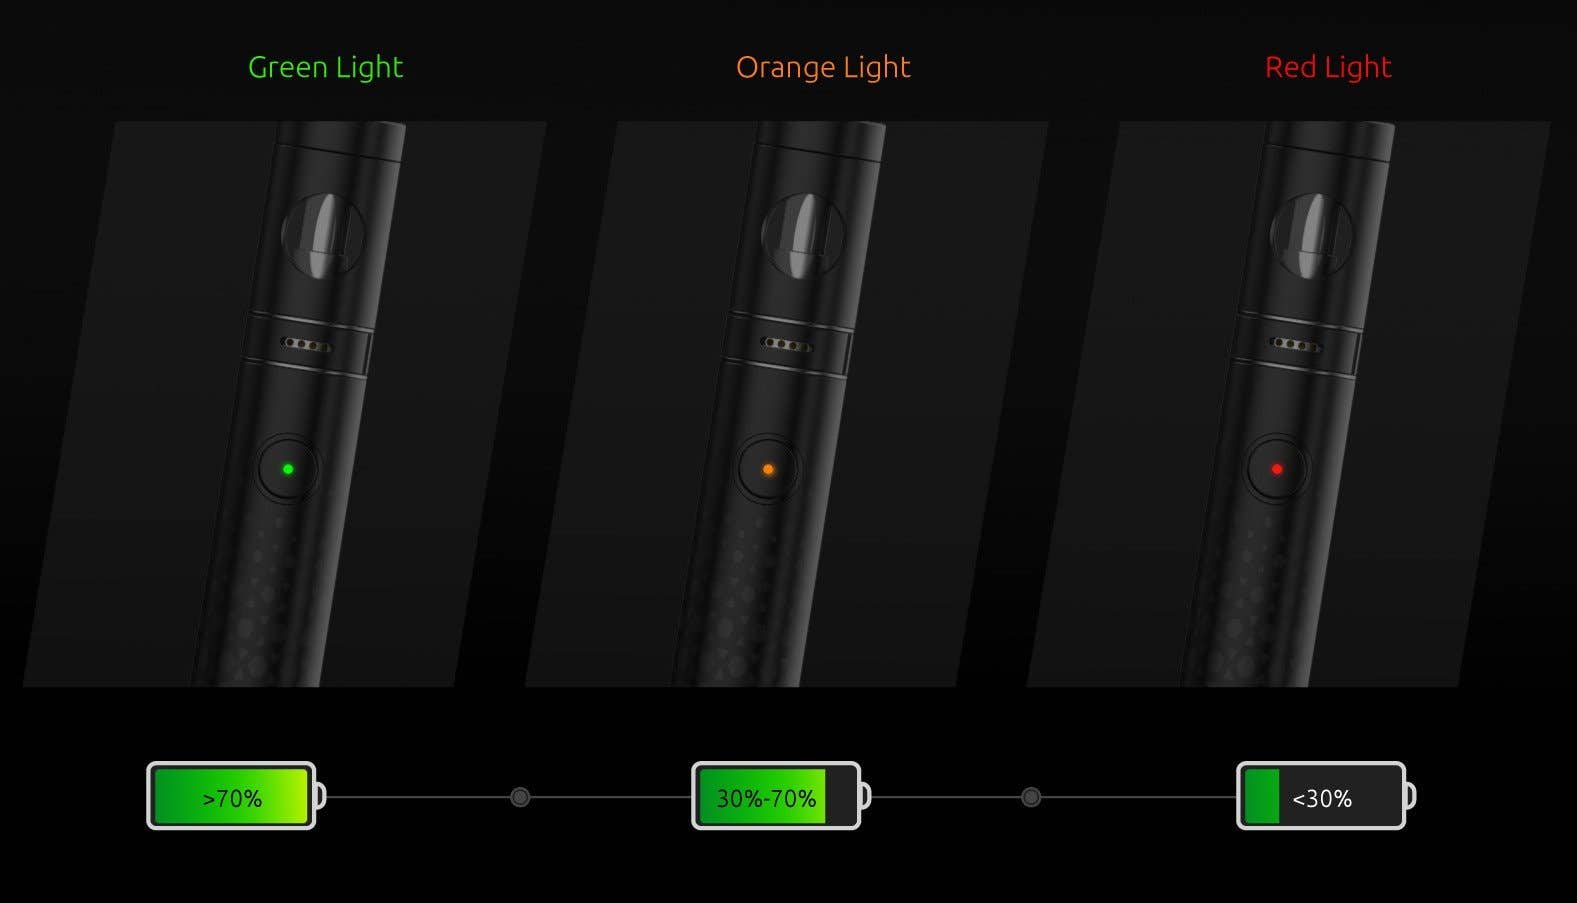 Stick N18 has a simple power level indicator to show how much battery life you have remaining